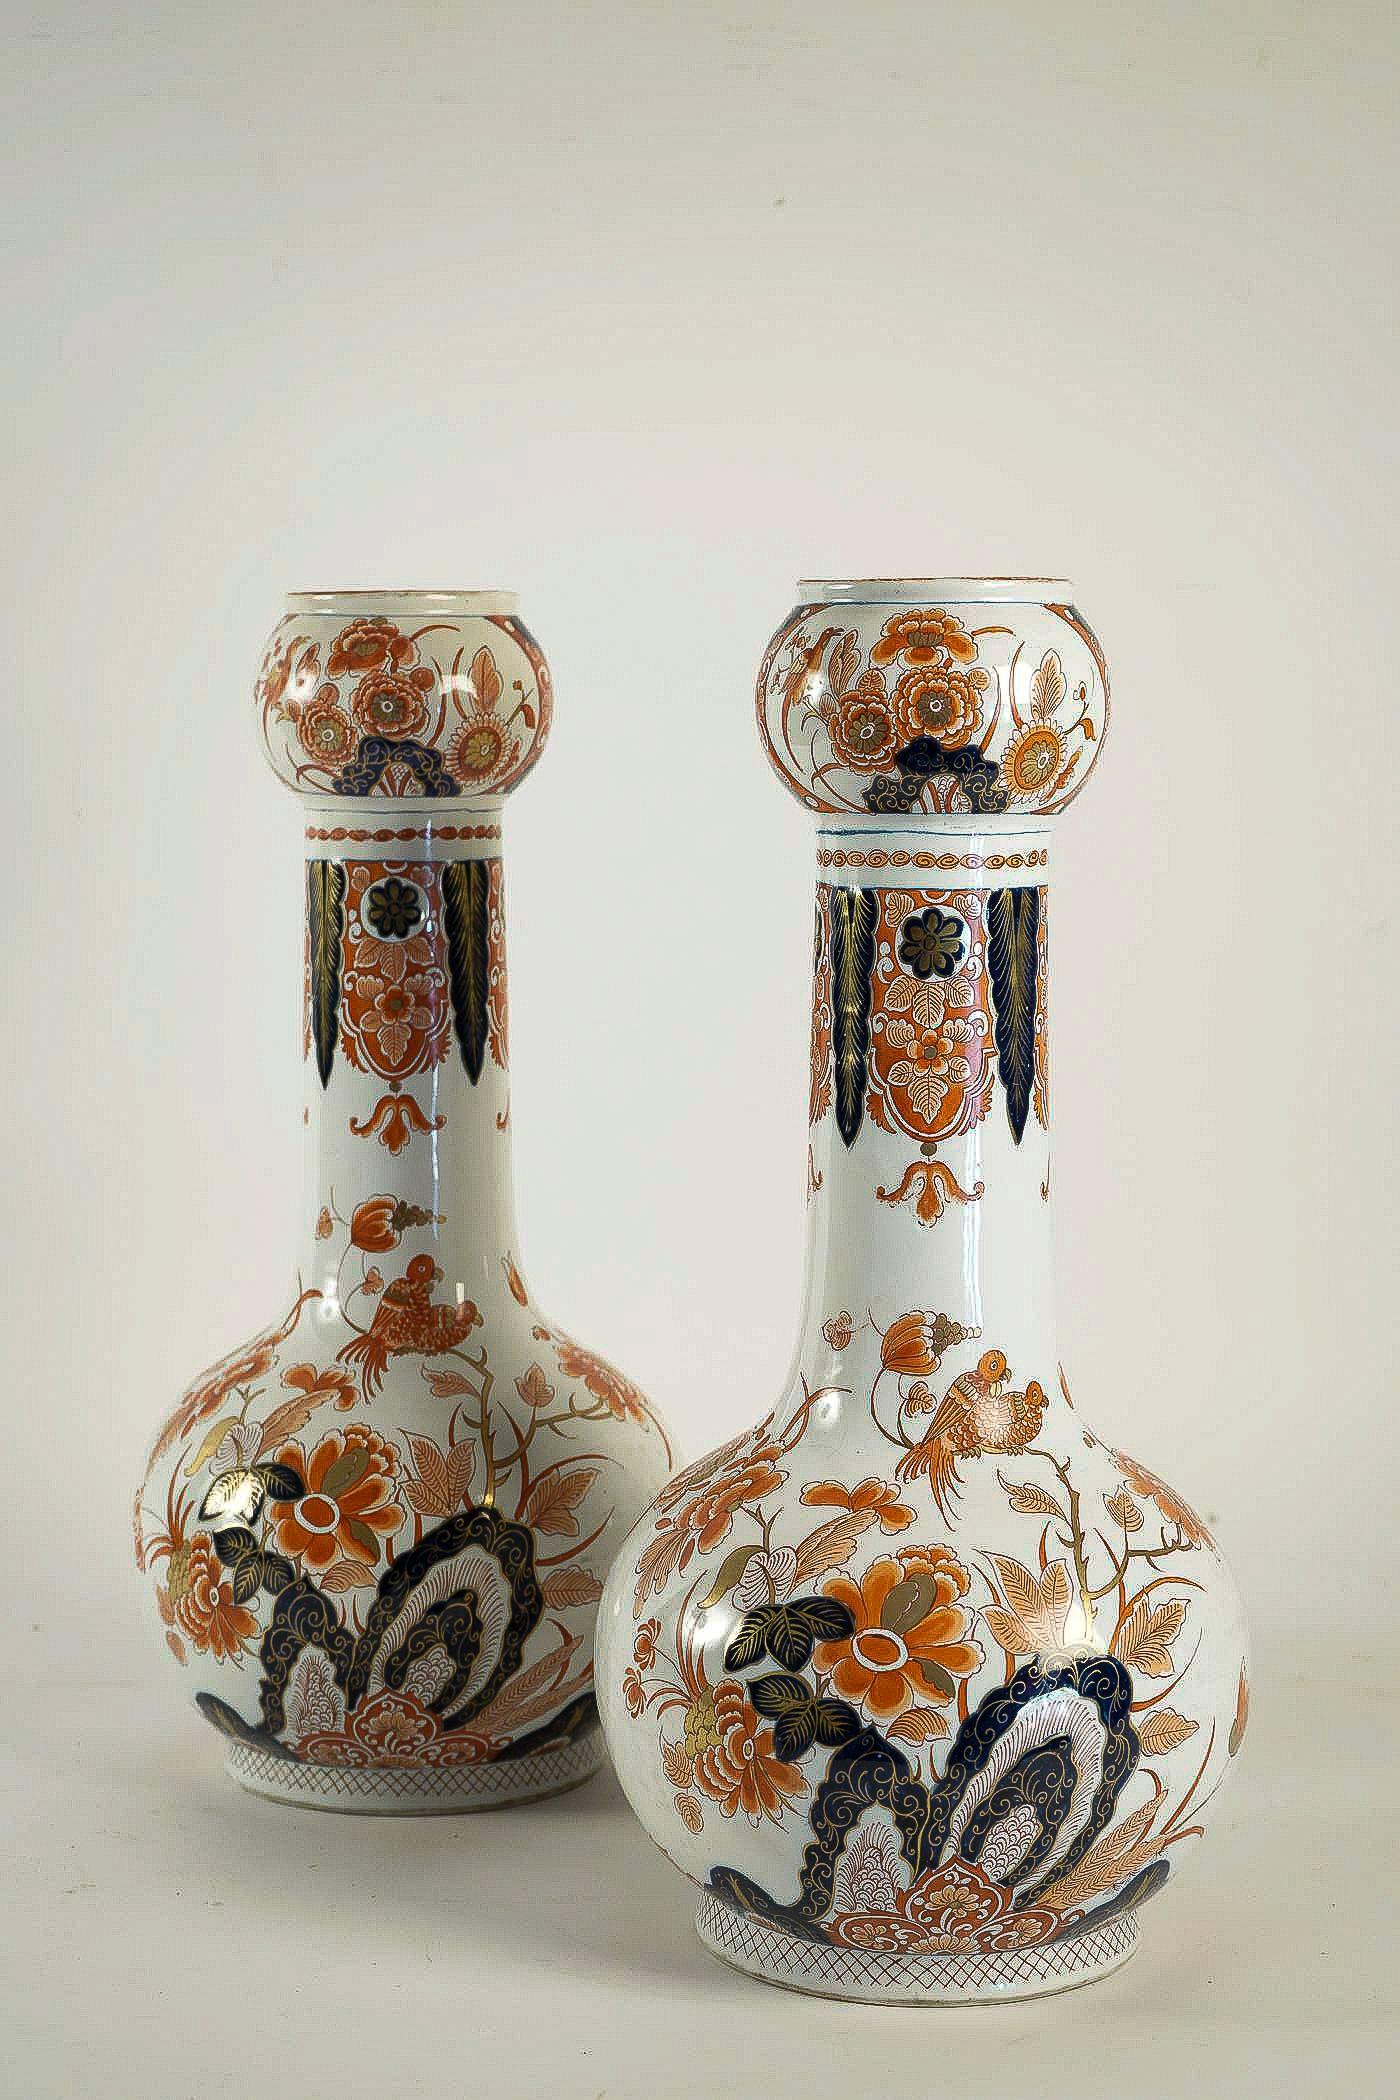 Dutch Late-18th Century, Polychrome Delft Faience Pair of Gourd-Shaped Vases For Sale 8